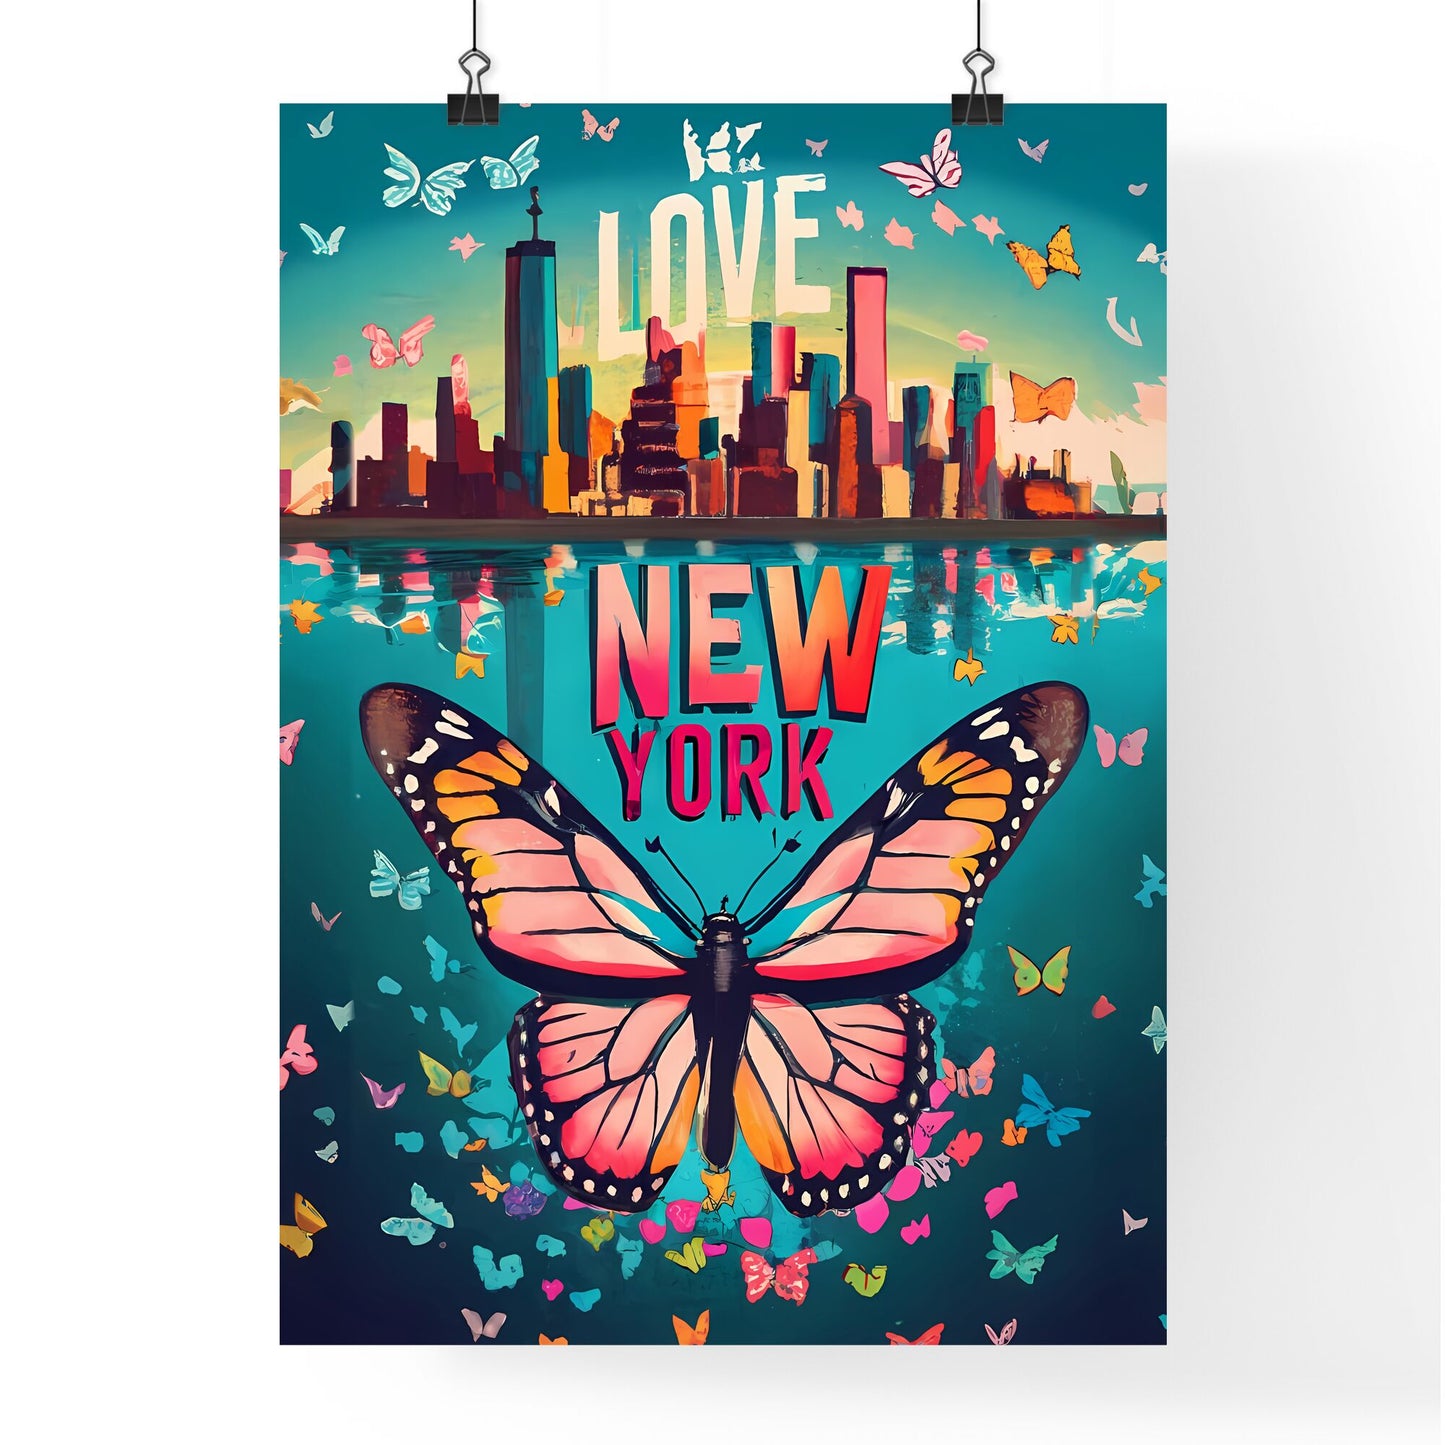 Love New York - A Butterfly Flying Over A City Default Title